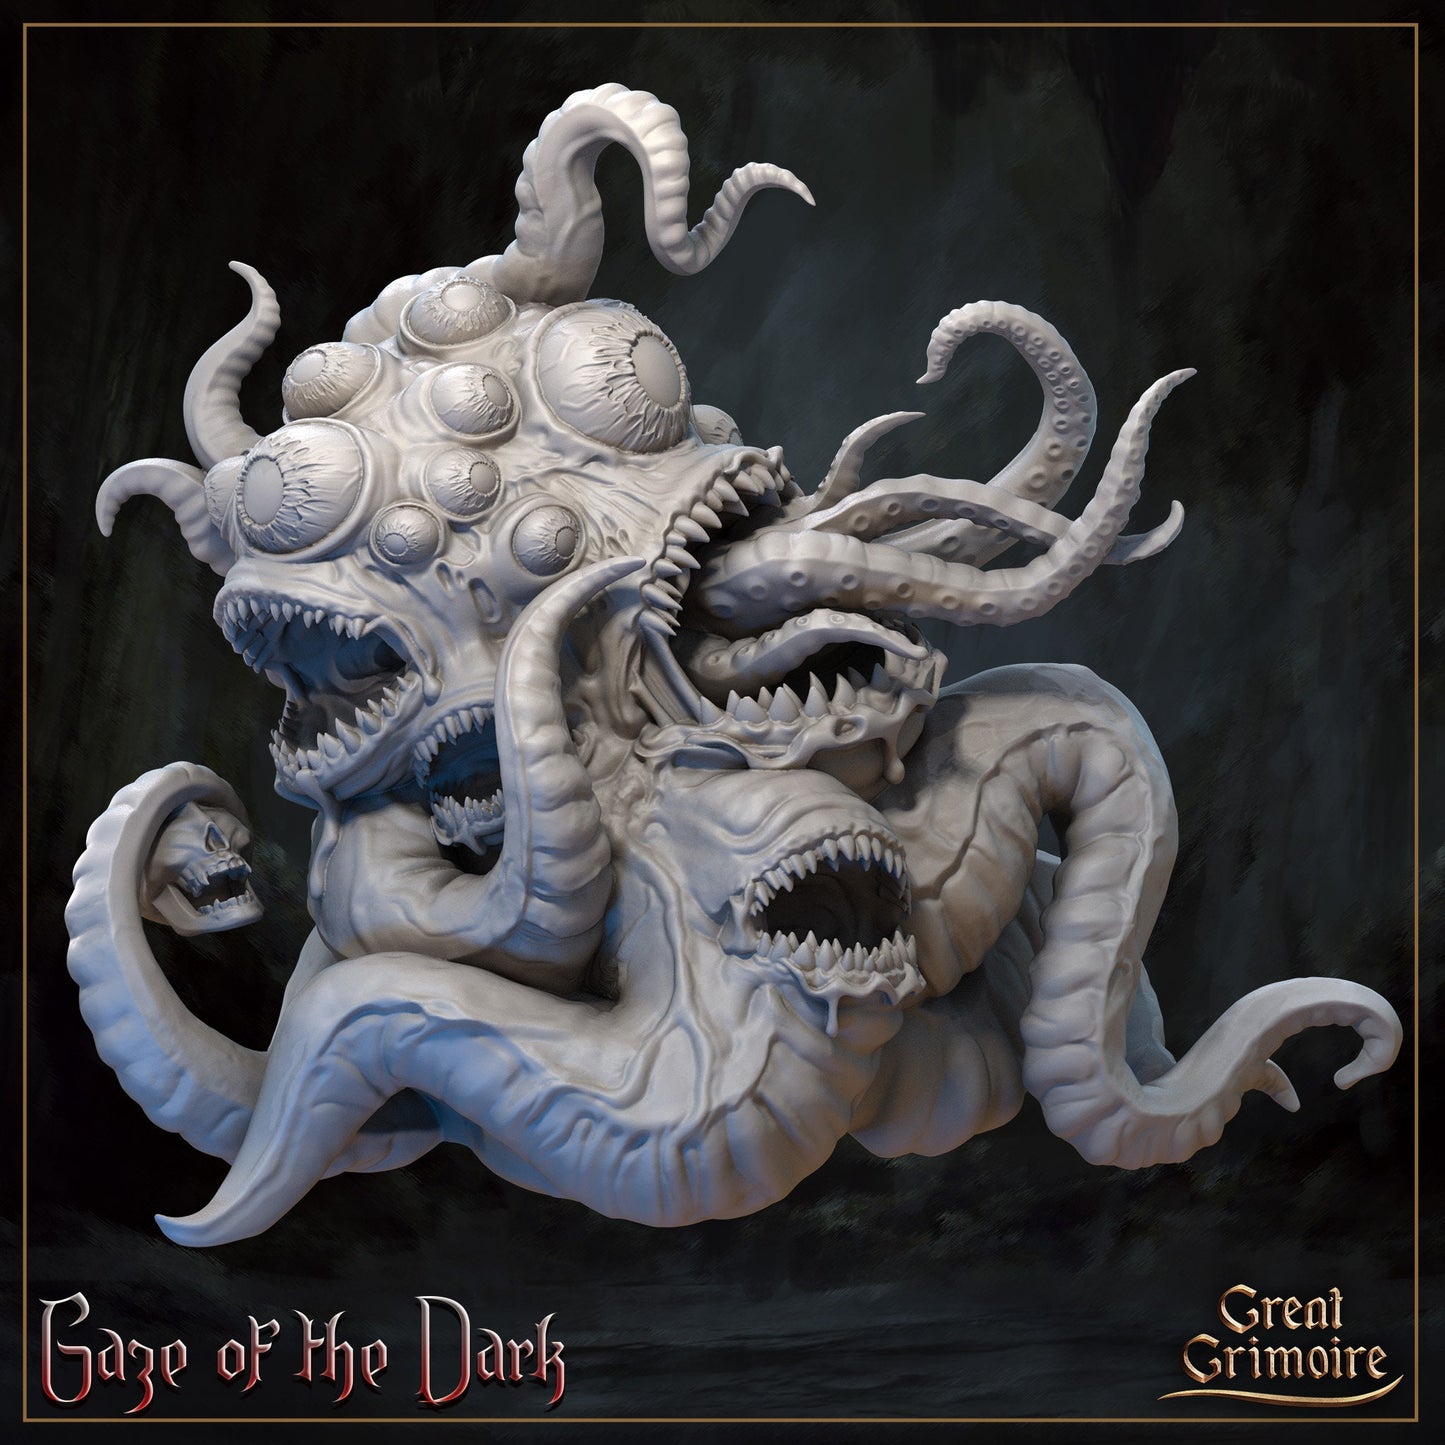 Gaze of the Dark Fully Painted - Great Grimoire Printed Miniature | Dungeons & Dragons | Pathfinder | Tabletop